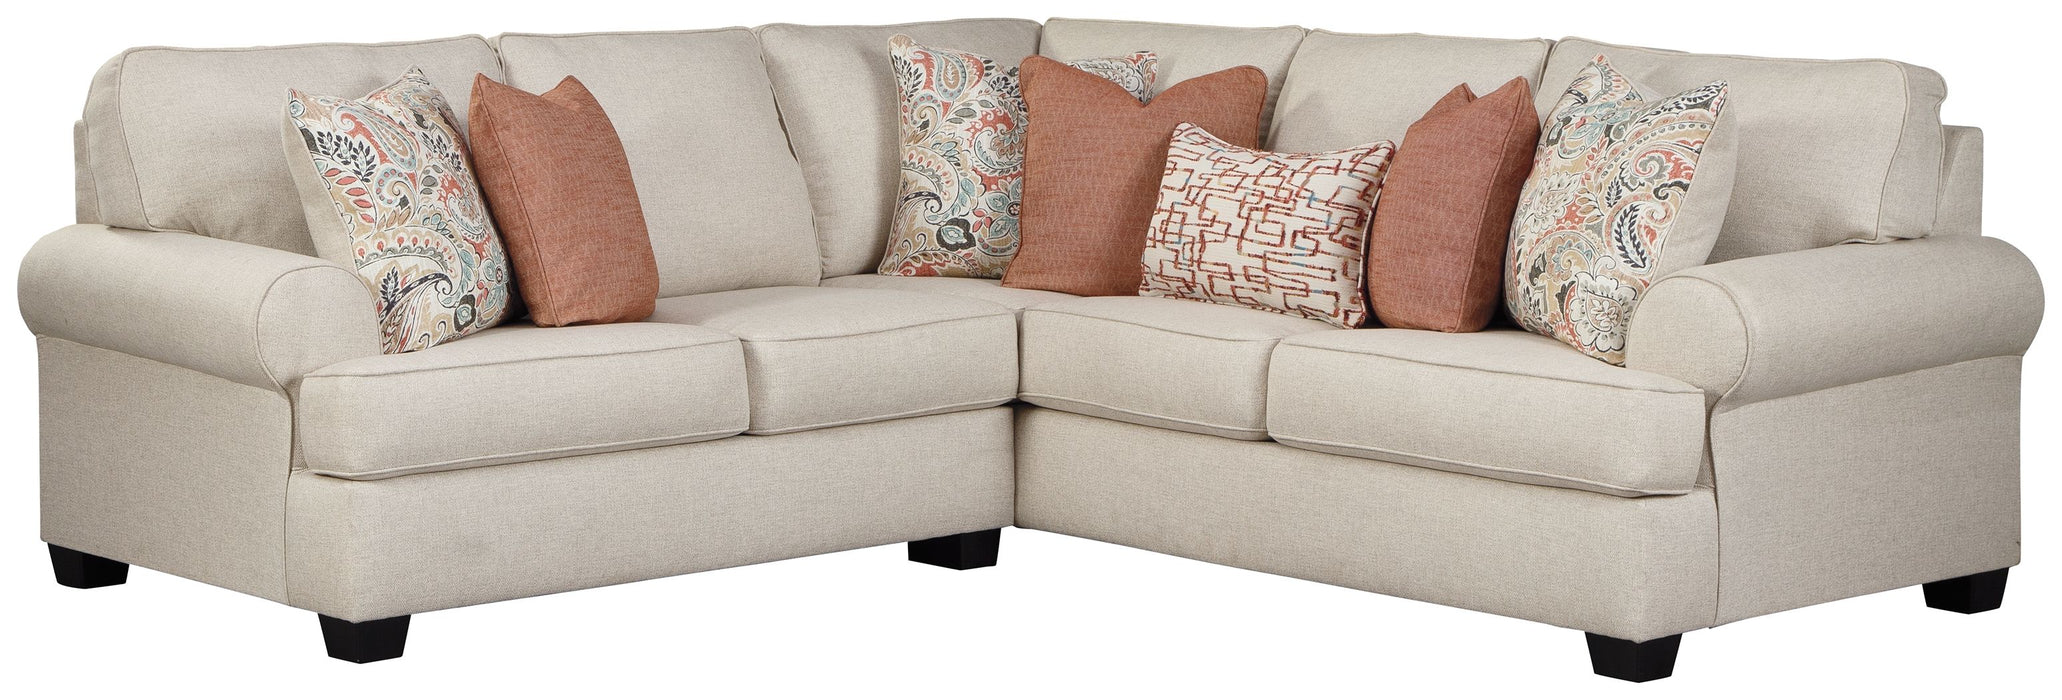 Amici - Sectional